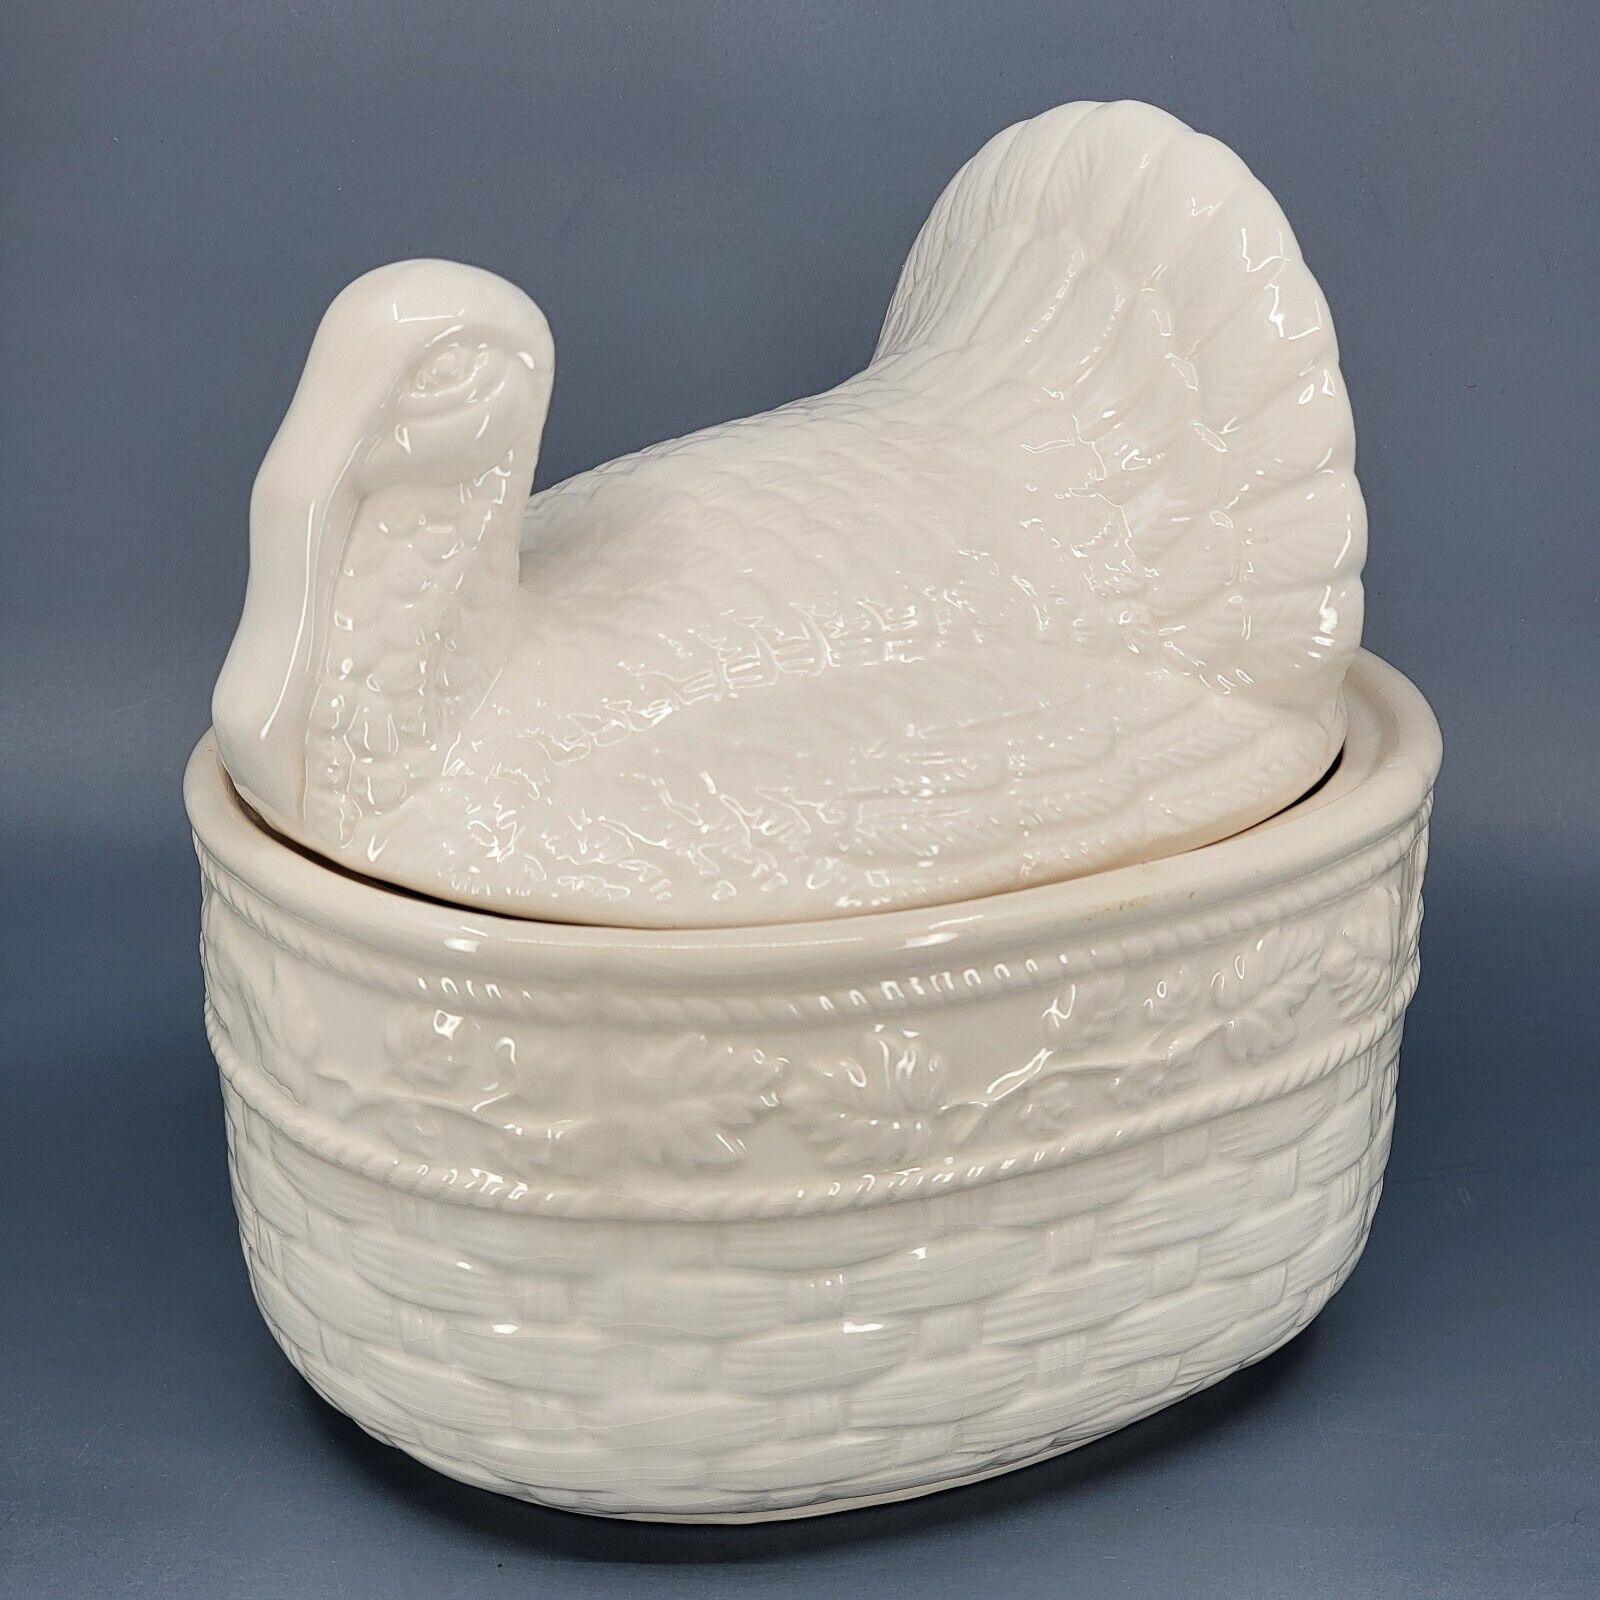 Vintage White Ceramic Turkey on Basket Stuffing Container Thanksgiving Poultry